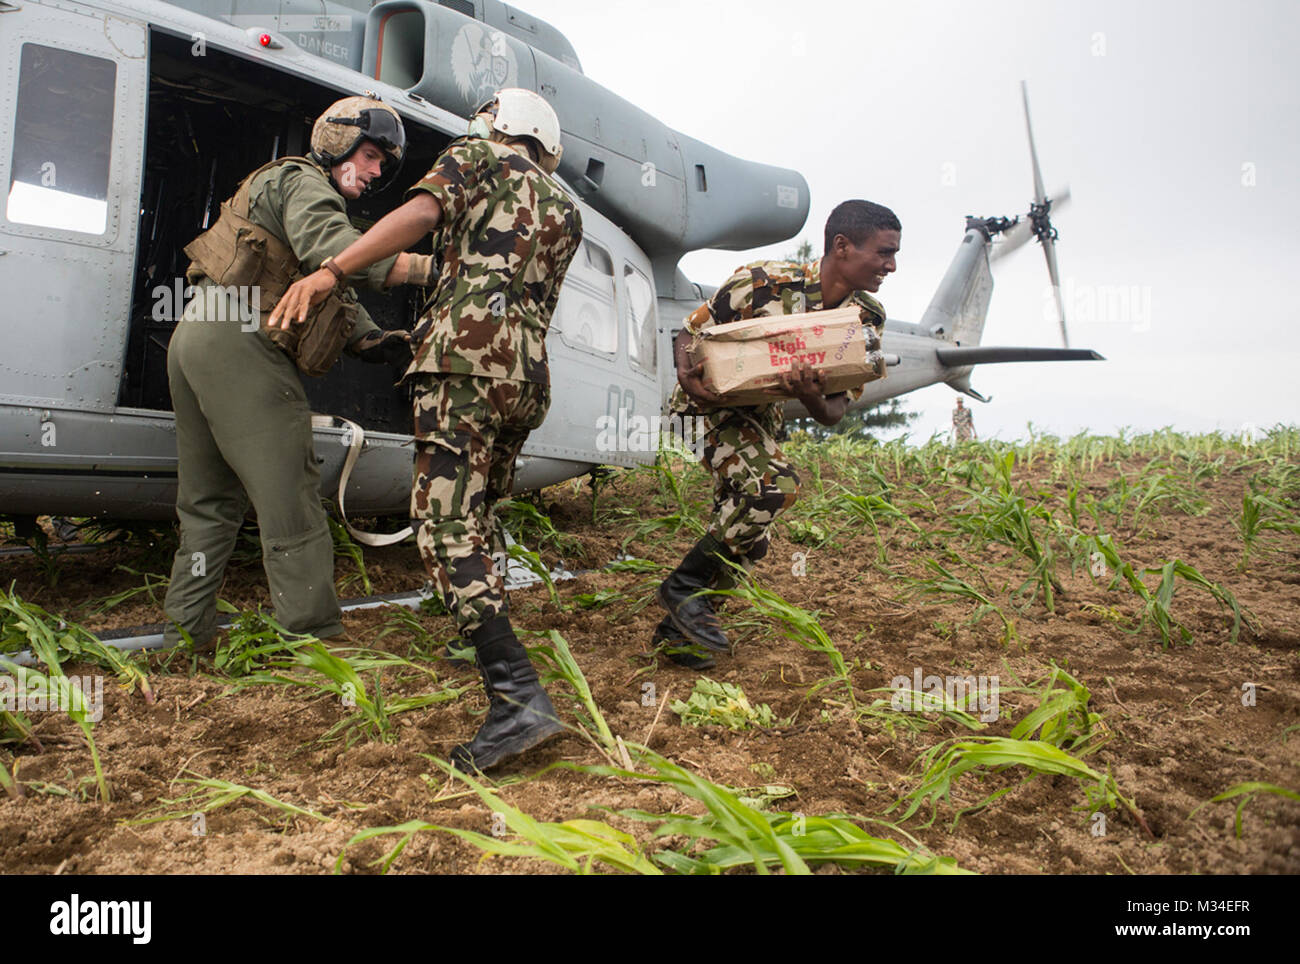 Nepalese army soldiers unload aid and relief supplies, delivered by Joint Task Force 505, from a UH-1Y Venom in the Kavrepalanchowk District, Nepal, May, 11, during Operation Sahayogi Haat.  The Nepalese Government requested the U.S. Government’s assistance after a 7.8 magnitude earthquake struck the country, April 25. The U.S. government ordered JTF 505 to provide unique capabilities to assist Nepal. (U.S. Marine Corps photo by MCIPAC Combat Camera Staff Sgt. Jeffrey D. Anderson/Released) Nepali soldiers unload aid from a U.S. Marine Corps UH-1Y Venom helicopter by #PACOM Stock Photo